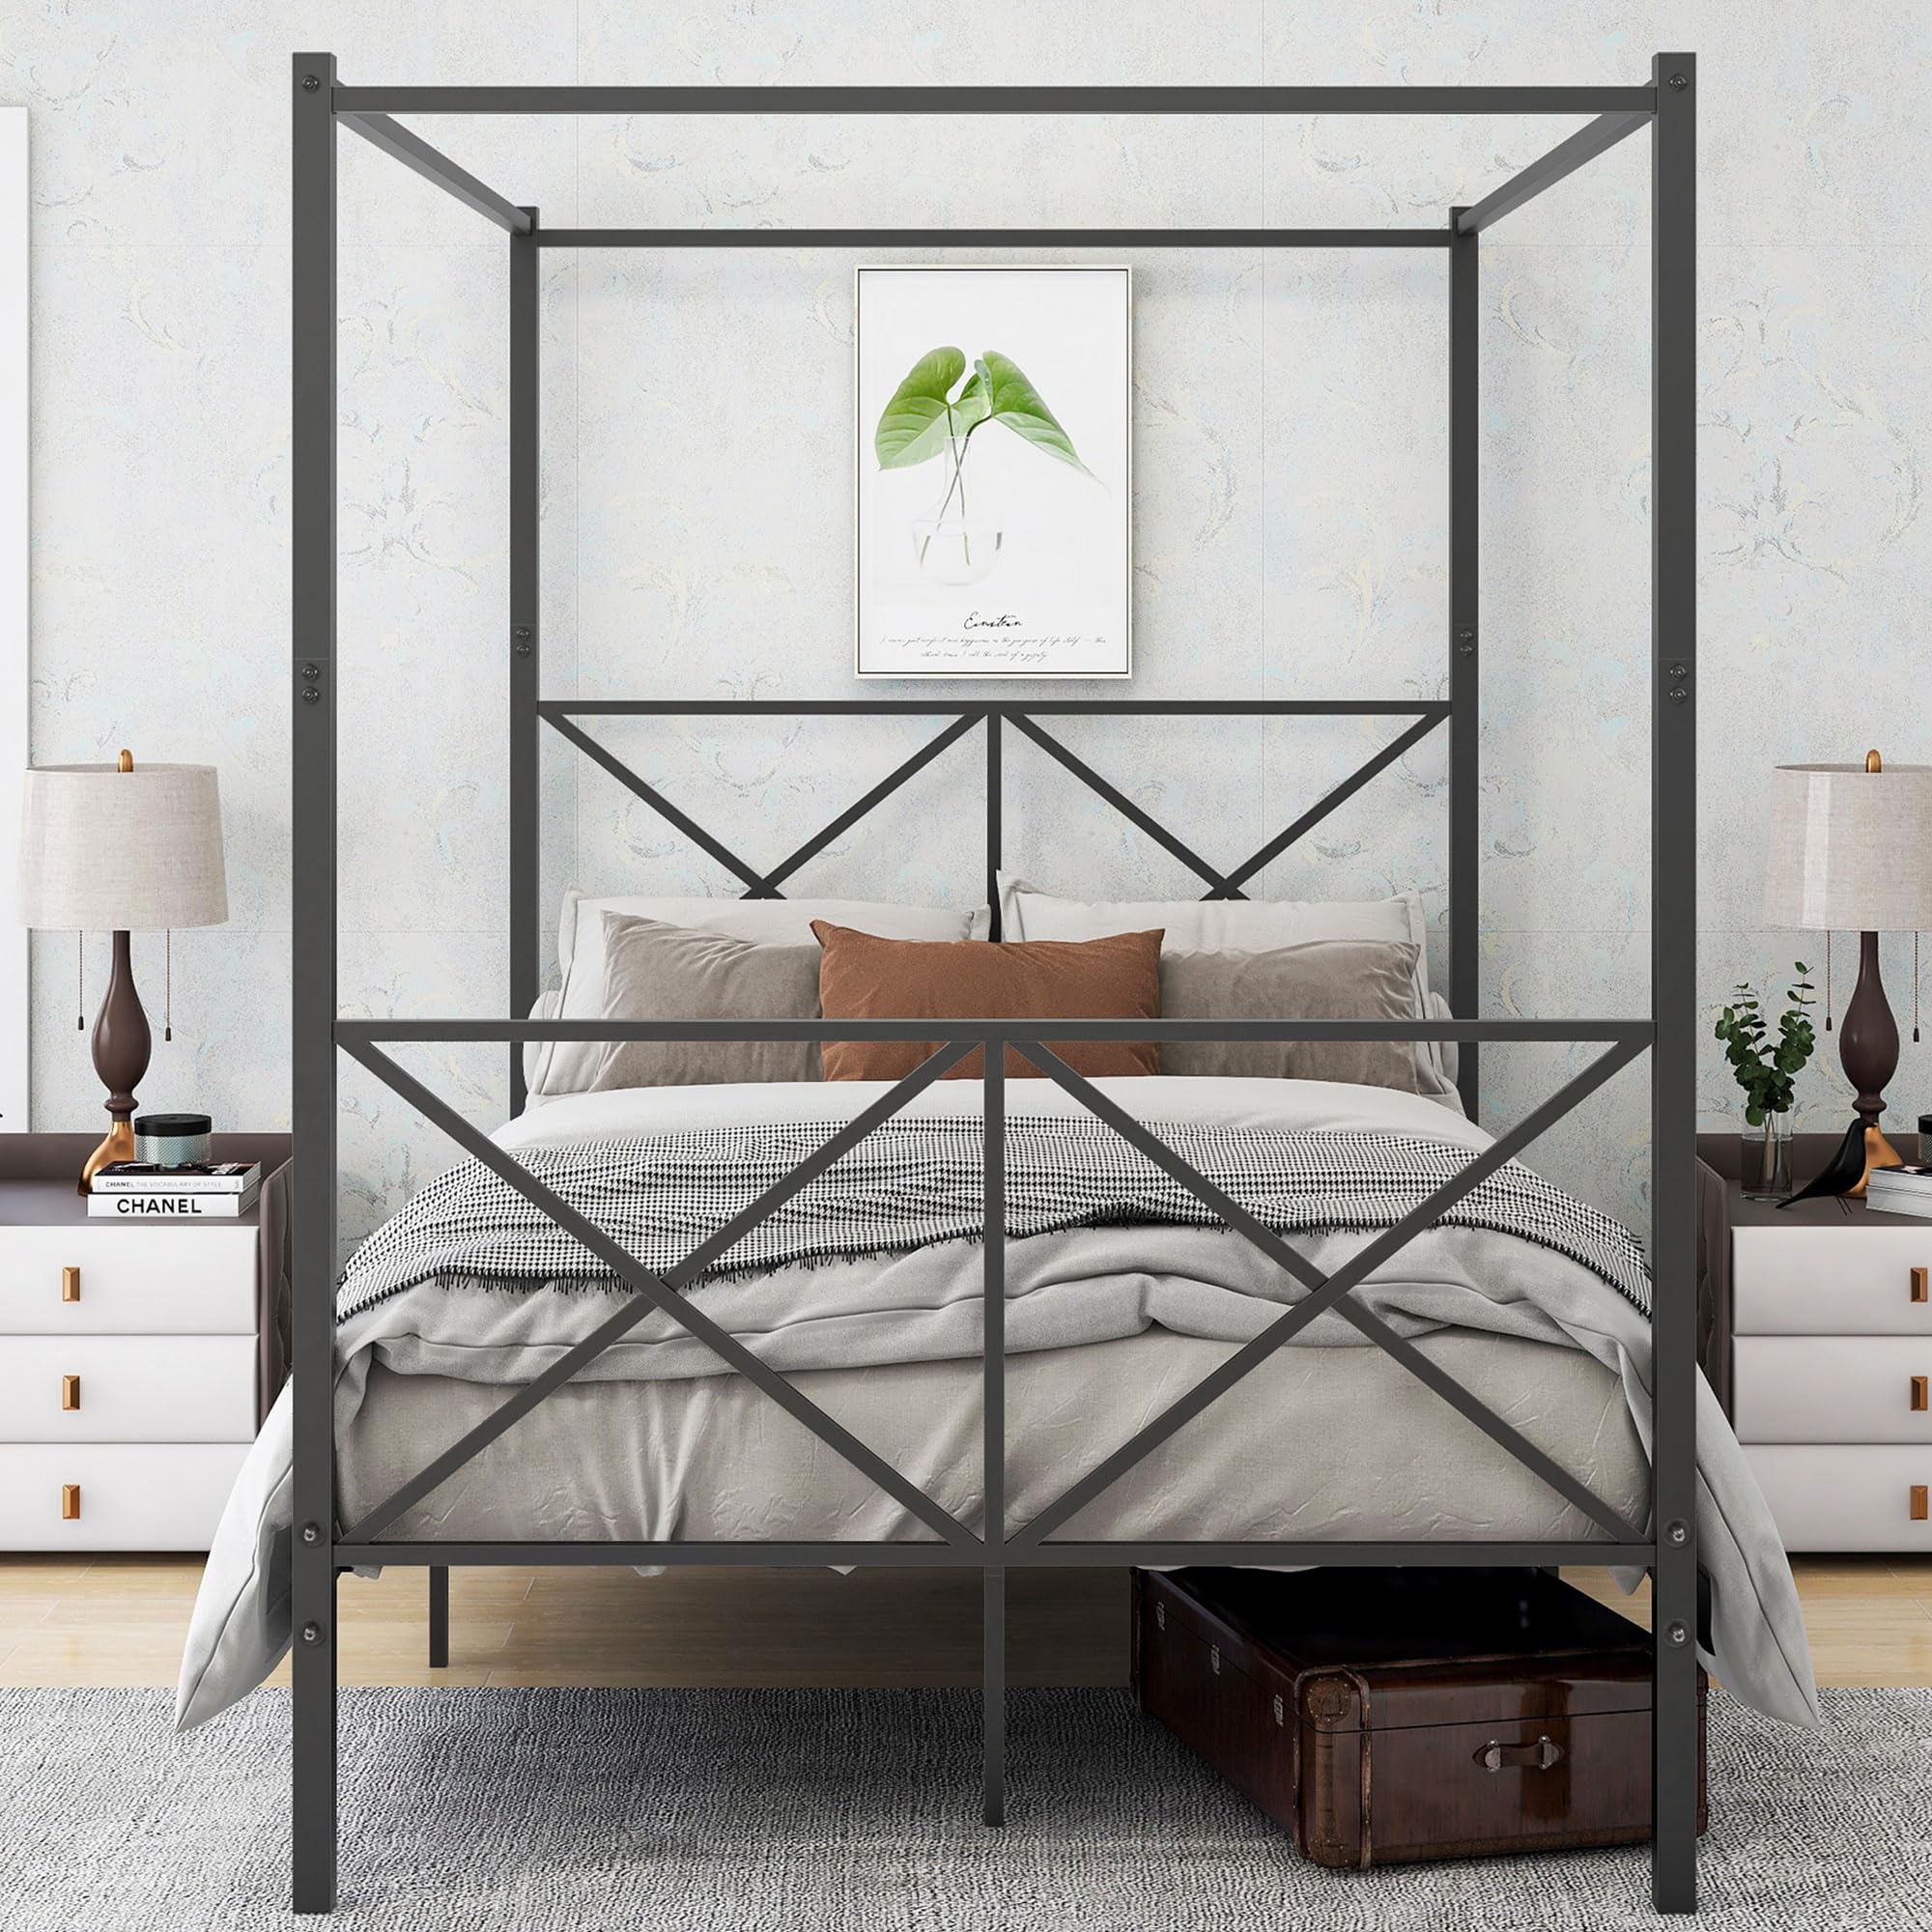 Lostcat Canopy Bed Frame Full Size, Metal Platform Bed Frame with X Shaped Headboard and Footboard,Detachable Canopy Bed, No Box Spring Needed/Easy Assembly, Black